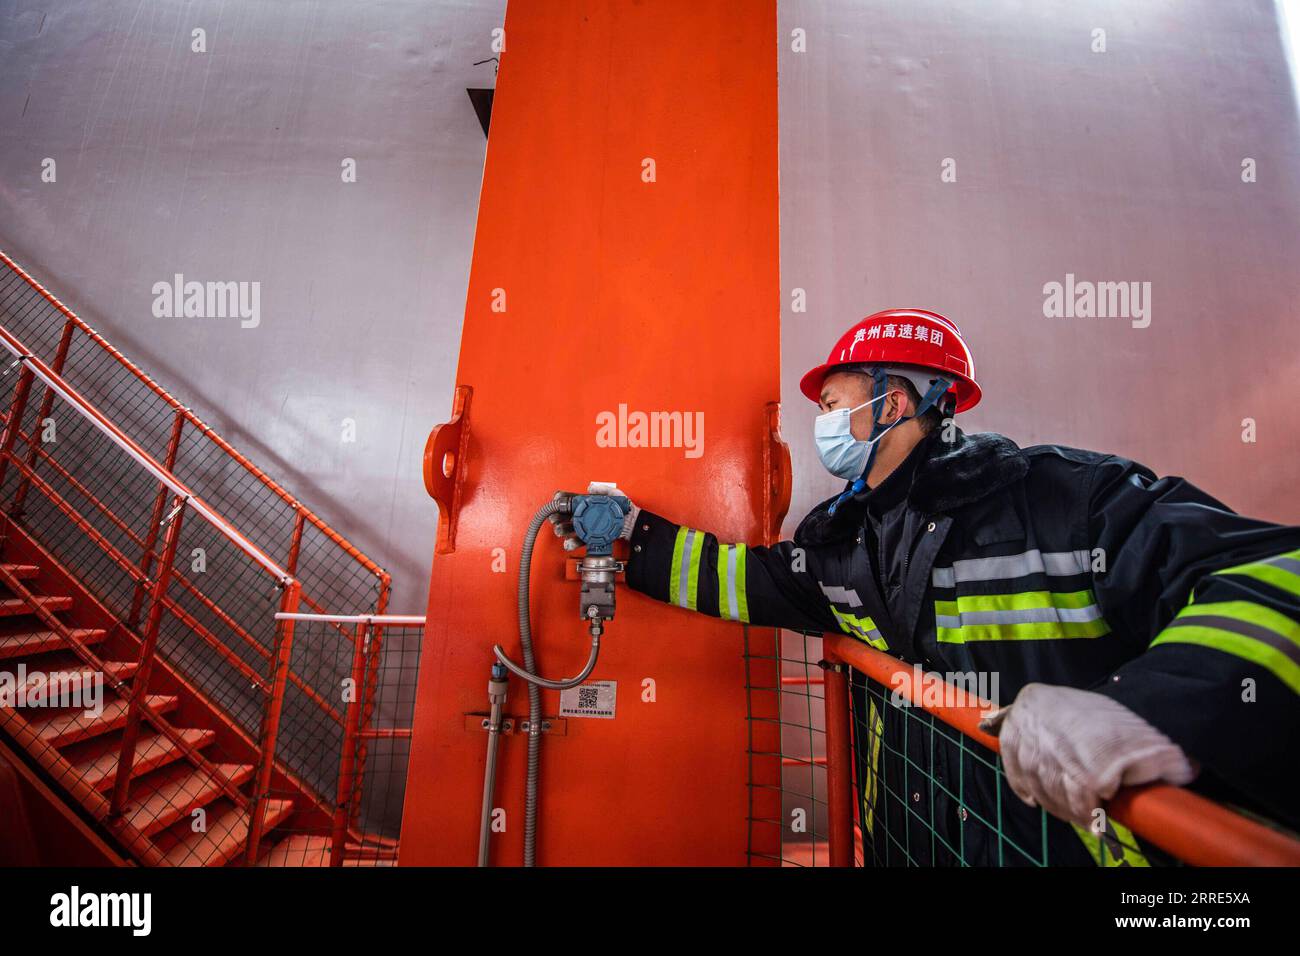 220130 -- LIUPANSHUI, Jan. 30, 2022 -- A maintenance worker examines the interior of the Beipanjiang Bridge in southwest China s Guizhou Province, Jan. 29, 2022. Sitting over 565.4 meters above a valley, the Beipanjiang Bridge has been certified as the world s highest bridge by the Guinness World Records. Spanning 1,341.4 meters, the bridge links Duge Township of Liupanshui in southwest China s Guizhou with Puli Township of Xuanwei in southwest China s Yunnan Province.  CHINA-GUIZHOU-LIUPANSHUI-BEIPANJIANG BRIDGE-MAINTENANCECN TaoxLiang PUBLICATIONxNOTxINxCHN Stock Photo